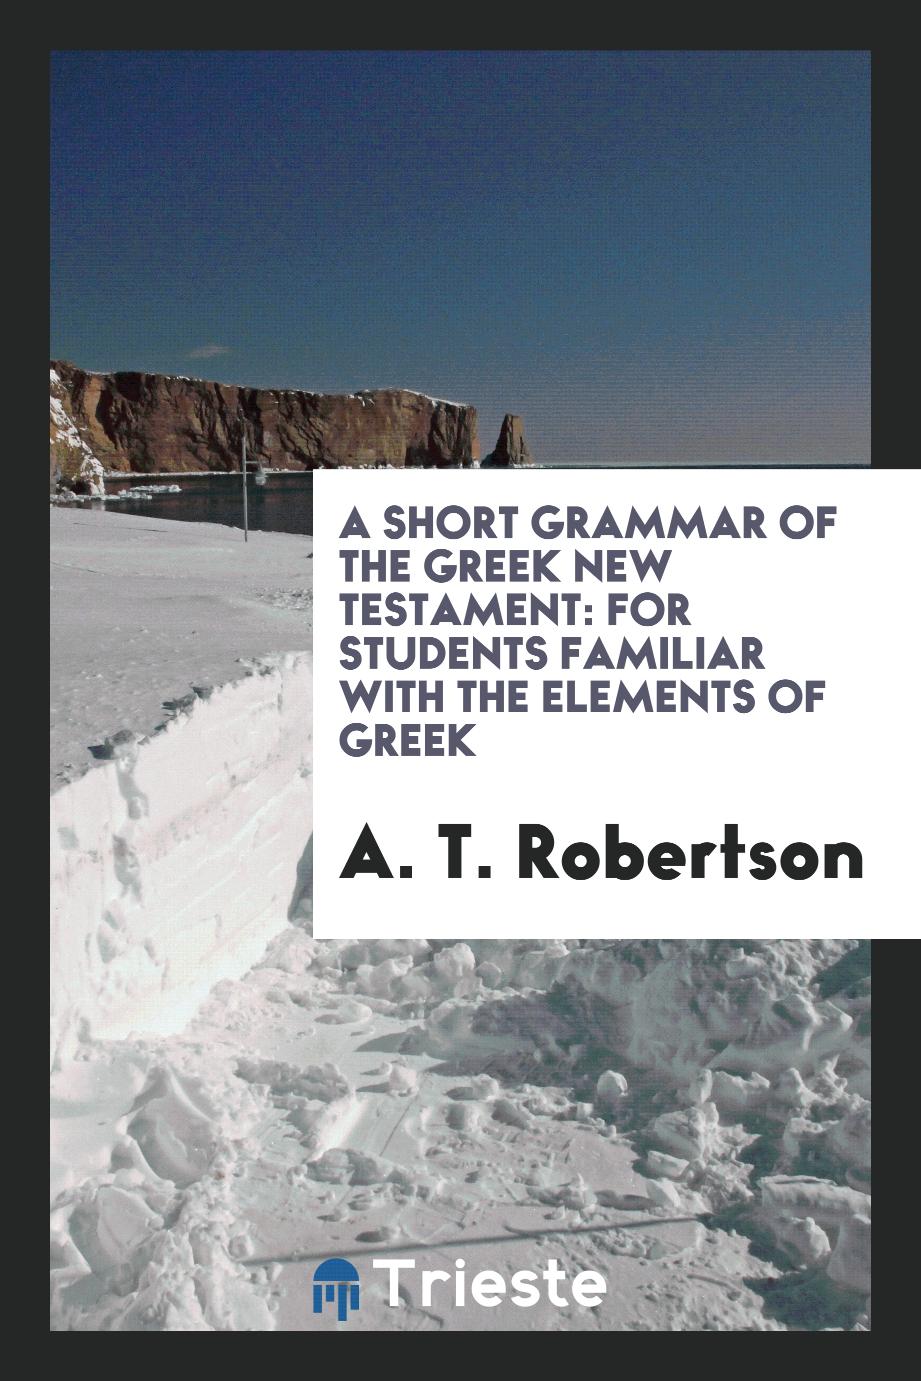 A Short Grammar of the Greek New Testament: For Students Familiar with the Elements of Greek